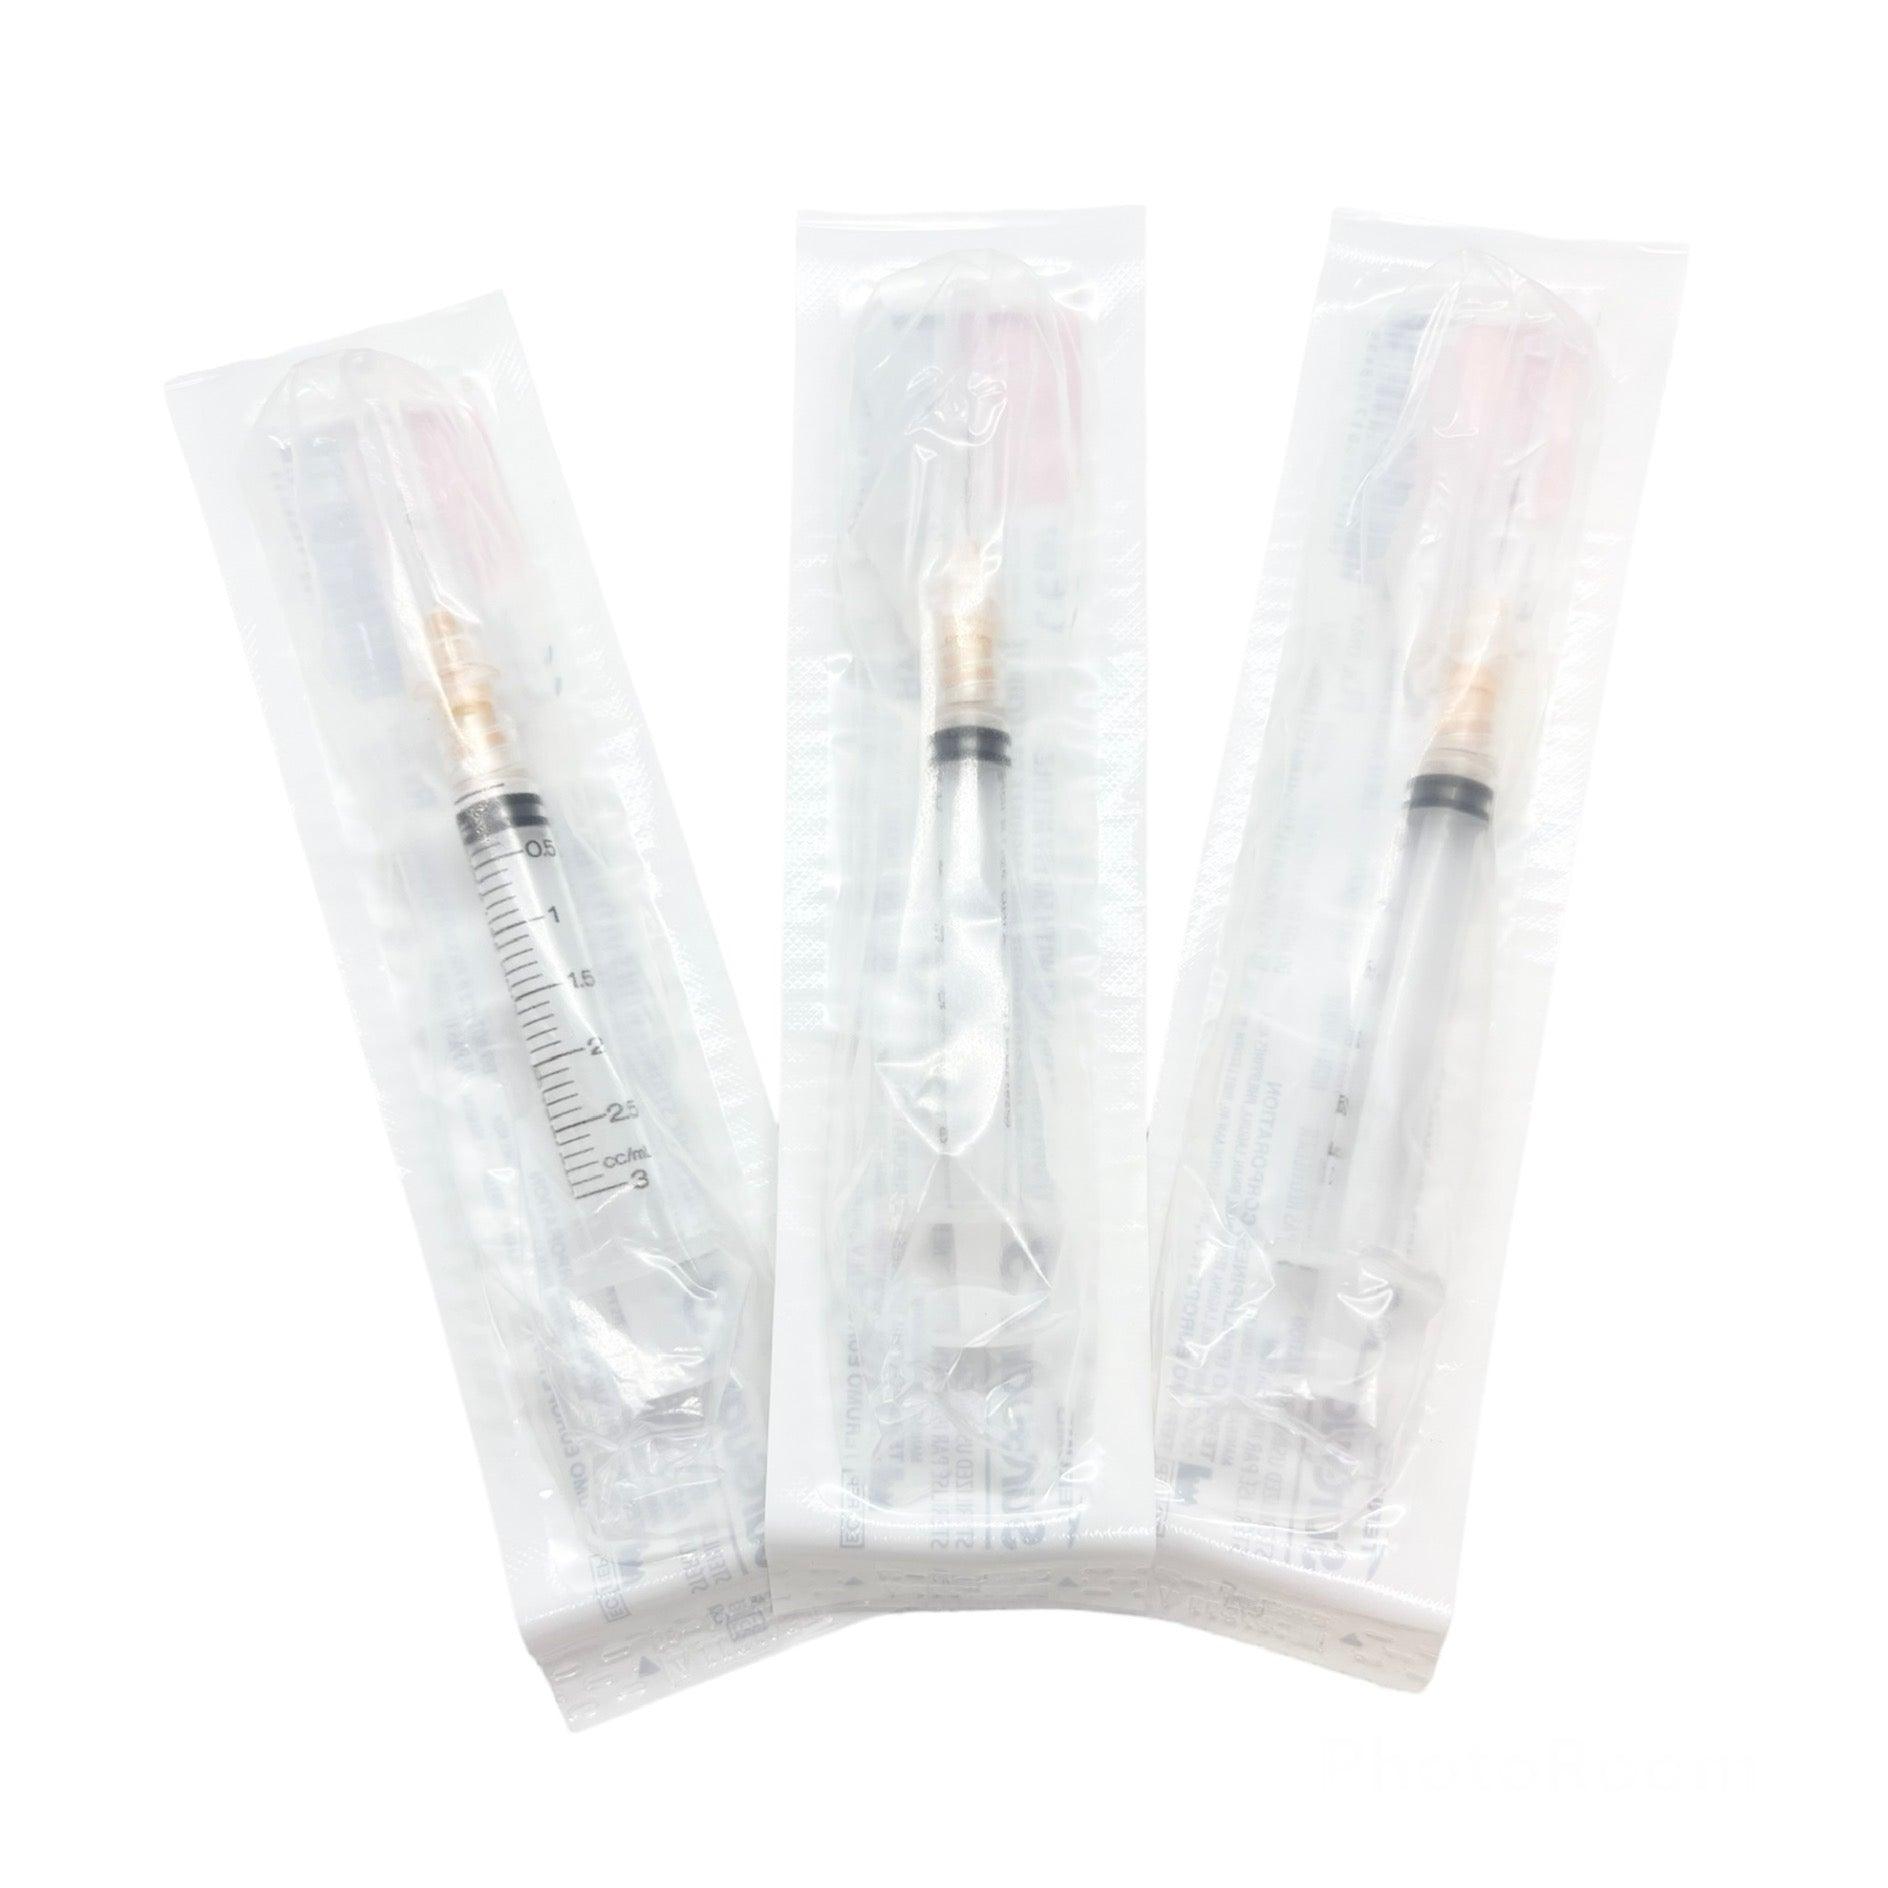 3 mL | 25G x 5/8" - Terumo SG3-03L2516 Hypodermic Syringes with Safety Needle | SurGuard 3 | 100 per Box